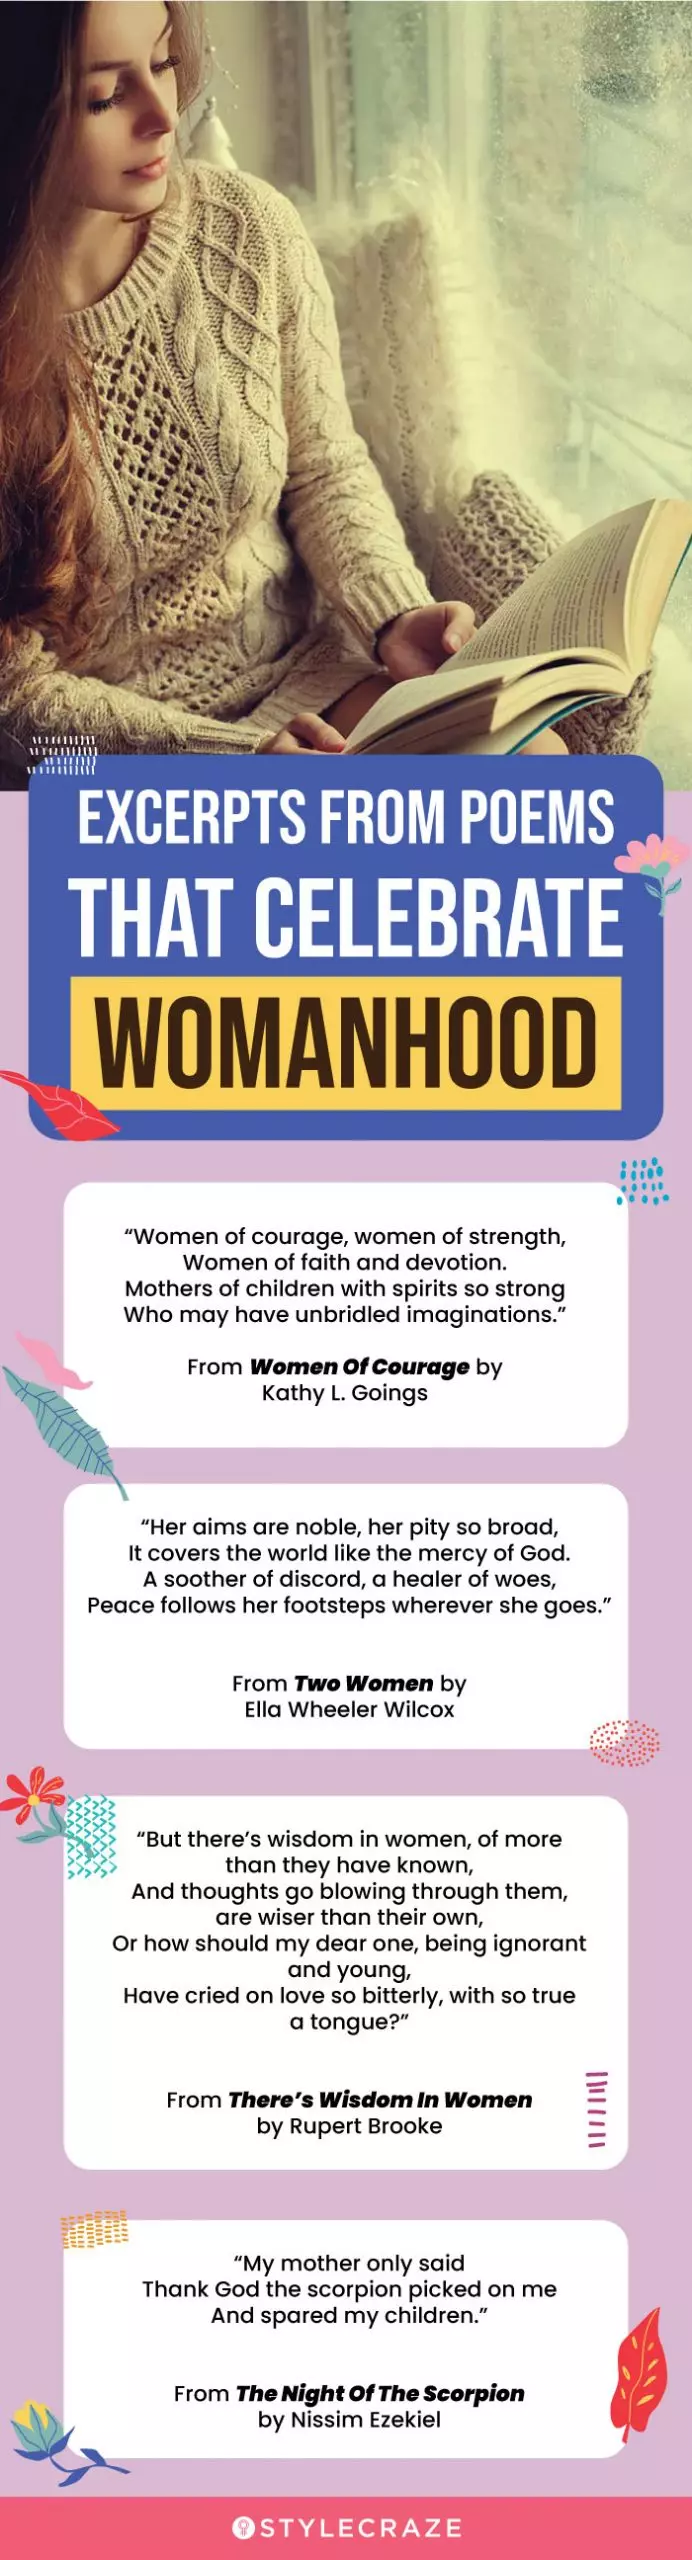 excerpts from poems that celebrate womanhood(infographic)